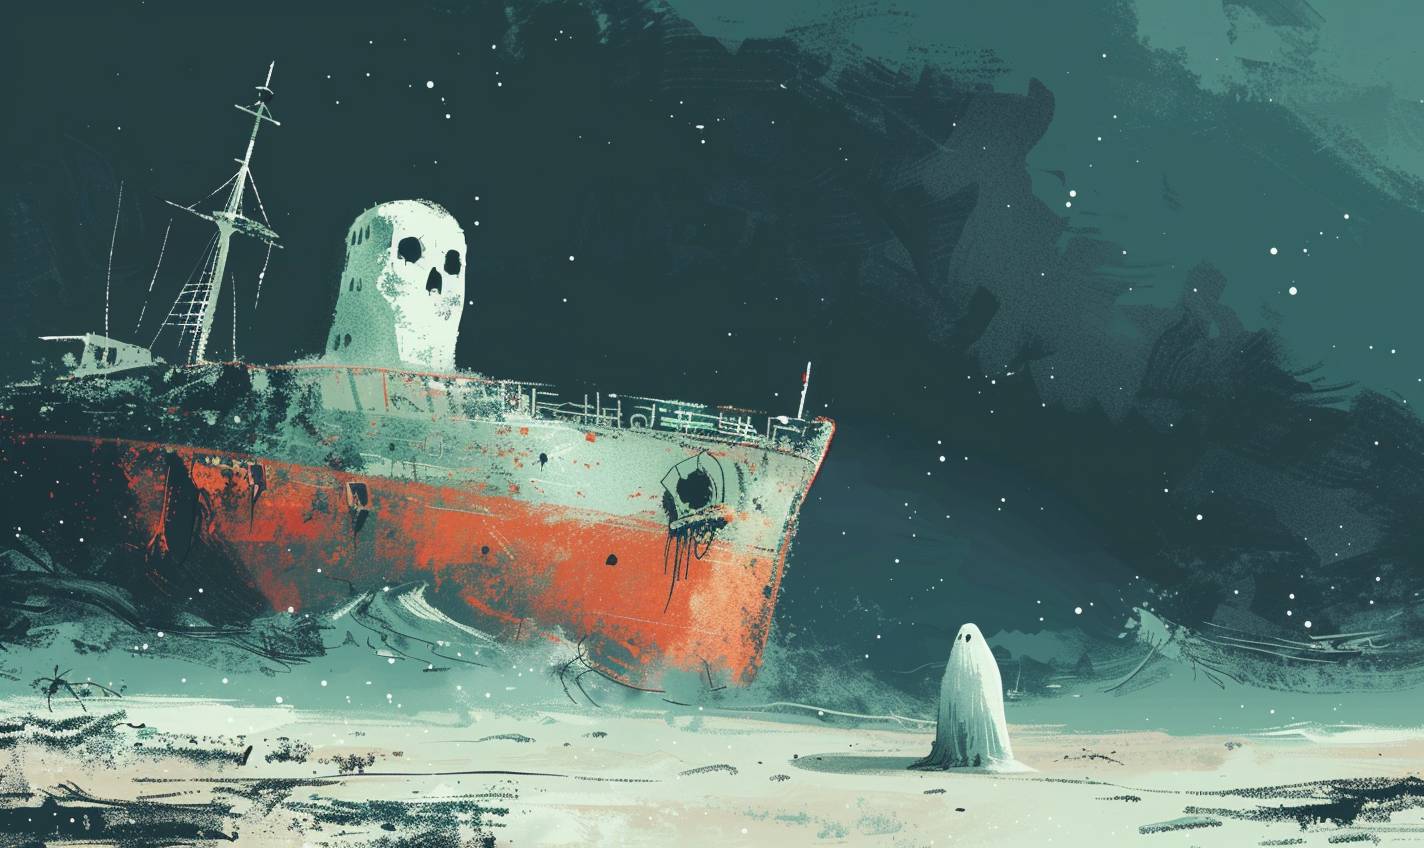 In style of Oliver Jeffers, Ghostly shipwreck on a haunted shore